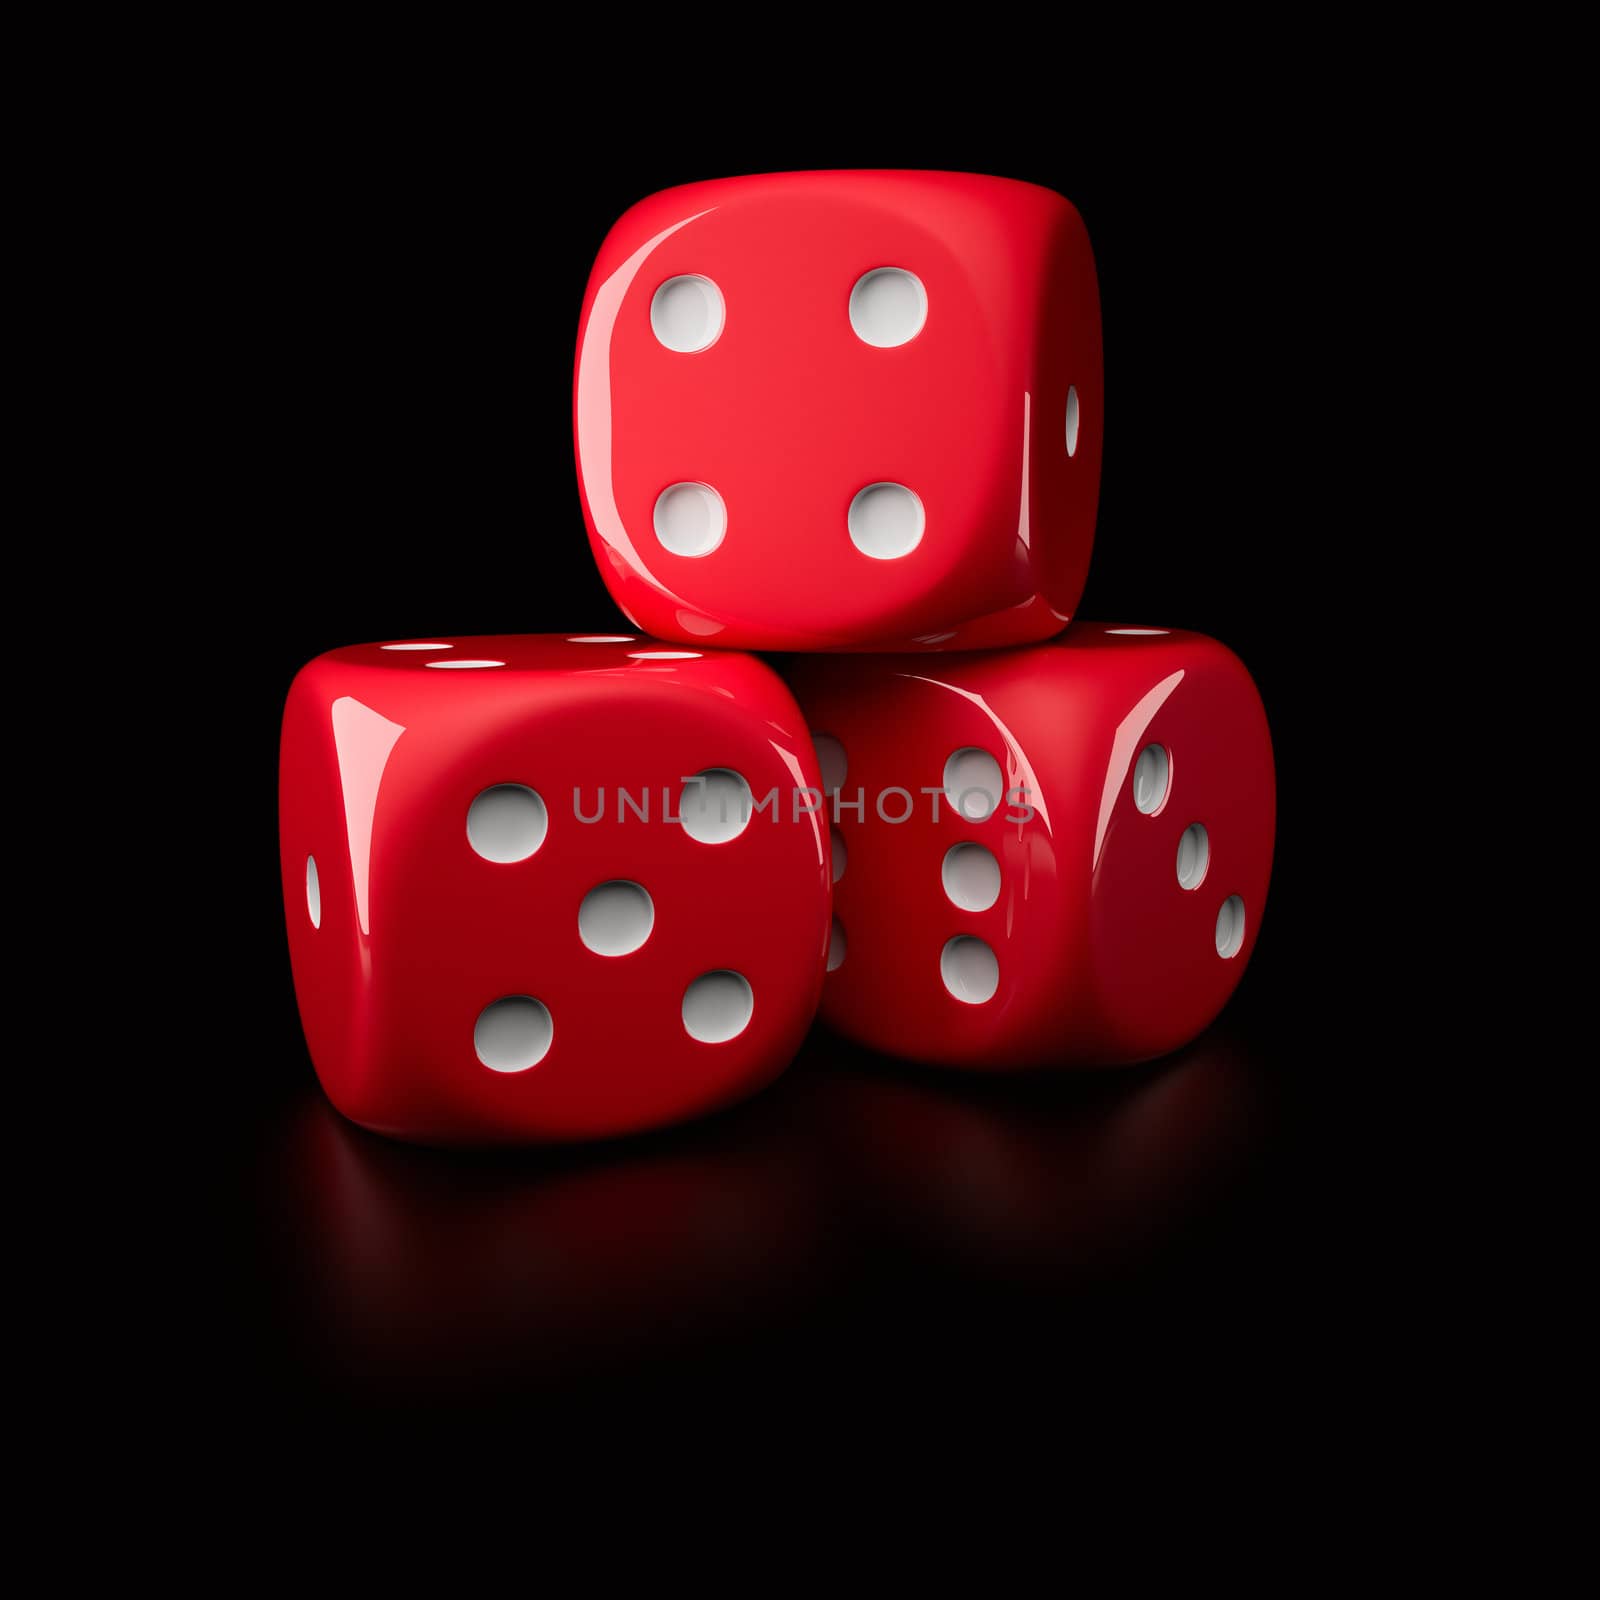 Three red dice showing different sides (on a right-handed, 6-sided die with pips)